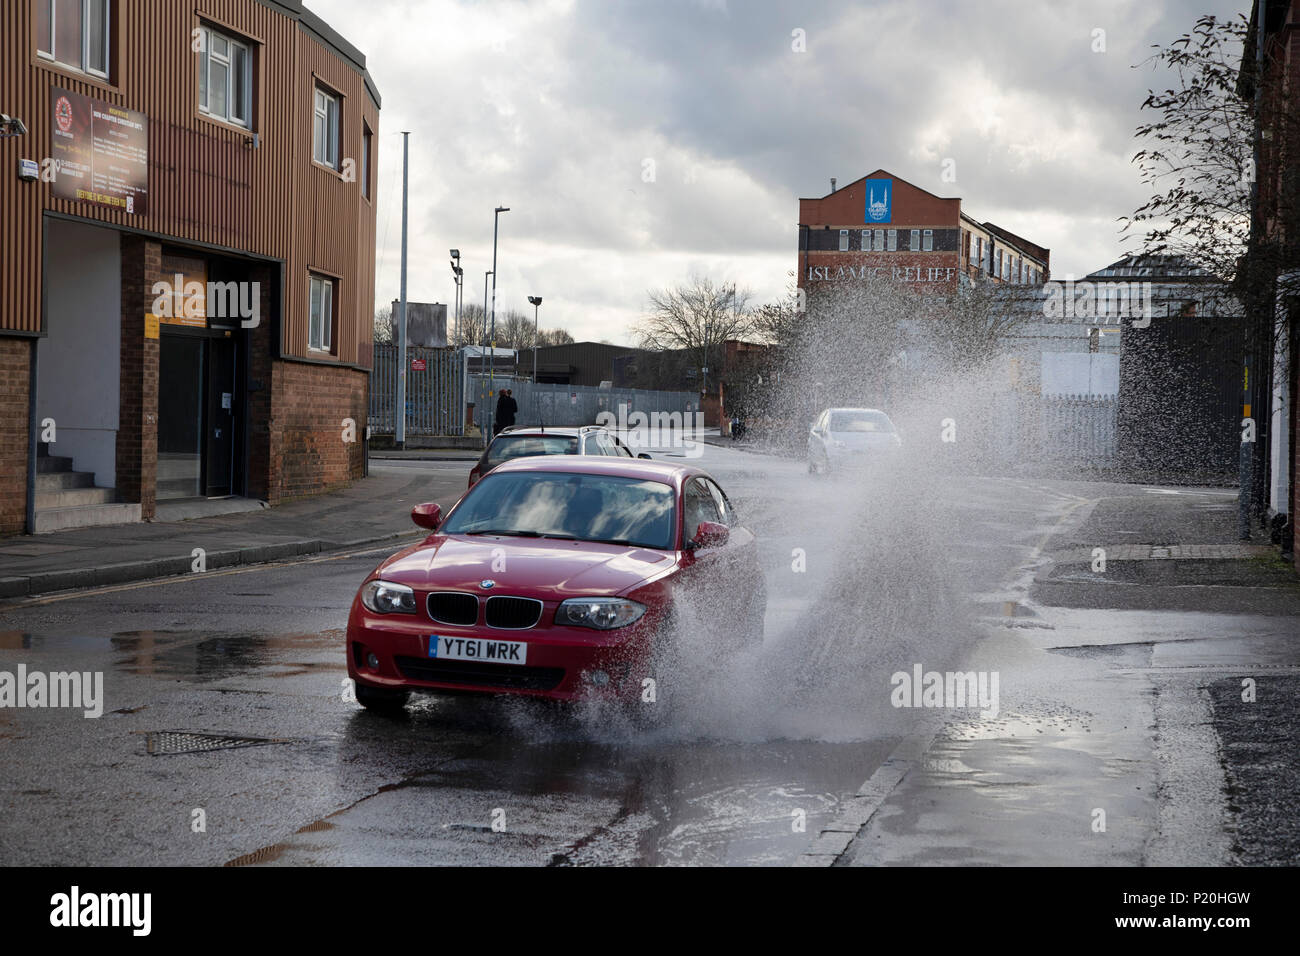 Car drives through a large puddle near to Islamic Relief Worldwide in Digbeth, Birmingham, England, United Kingdom. Digbeth is an area of Central Birmingham, England. Islamic Relief Worldwide is an international humanitarian organisation that provides development programs and humanitarian relief around the globe, regardless of race, political affiliation, gender or belief. Following the destruction of the Inner Ring Road, Digbeth is now considered a district within Birmingham City Centre. As part of the Big City Plan, Digbeth is undergoing a large redevelopment scheme that will regenerate the  Stock Photo